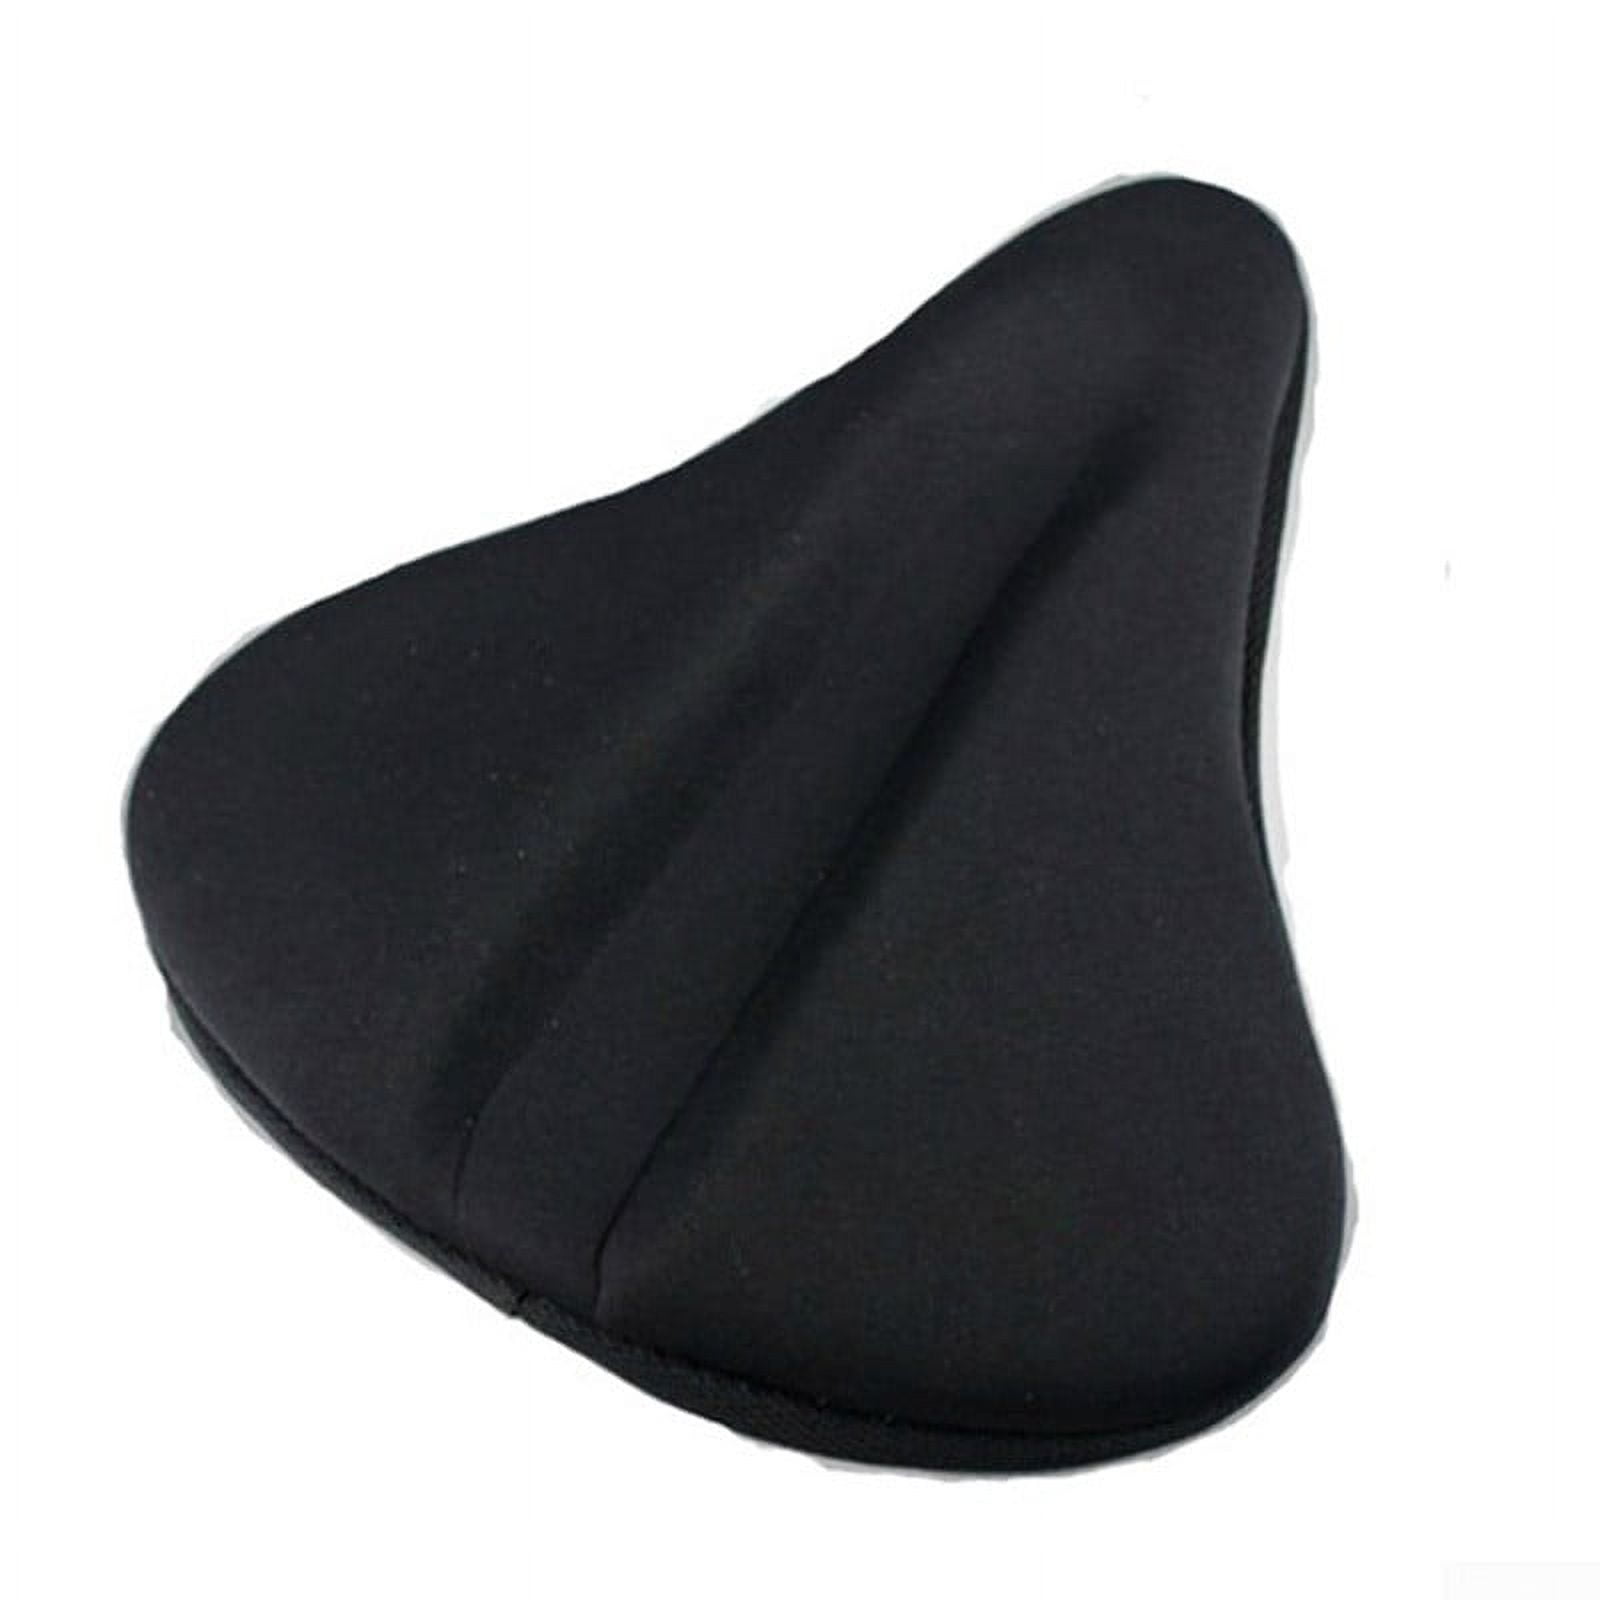 Omont Waterproof Bike Seat Cover: 2pcs Bicycle Seat Cover, Portable and  Thickened Bike Seat Cushion Protector Generic for Electric bike/Exercise  Bike with Reusable and Dust Resistant (Black)